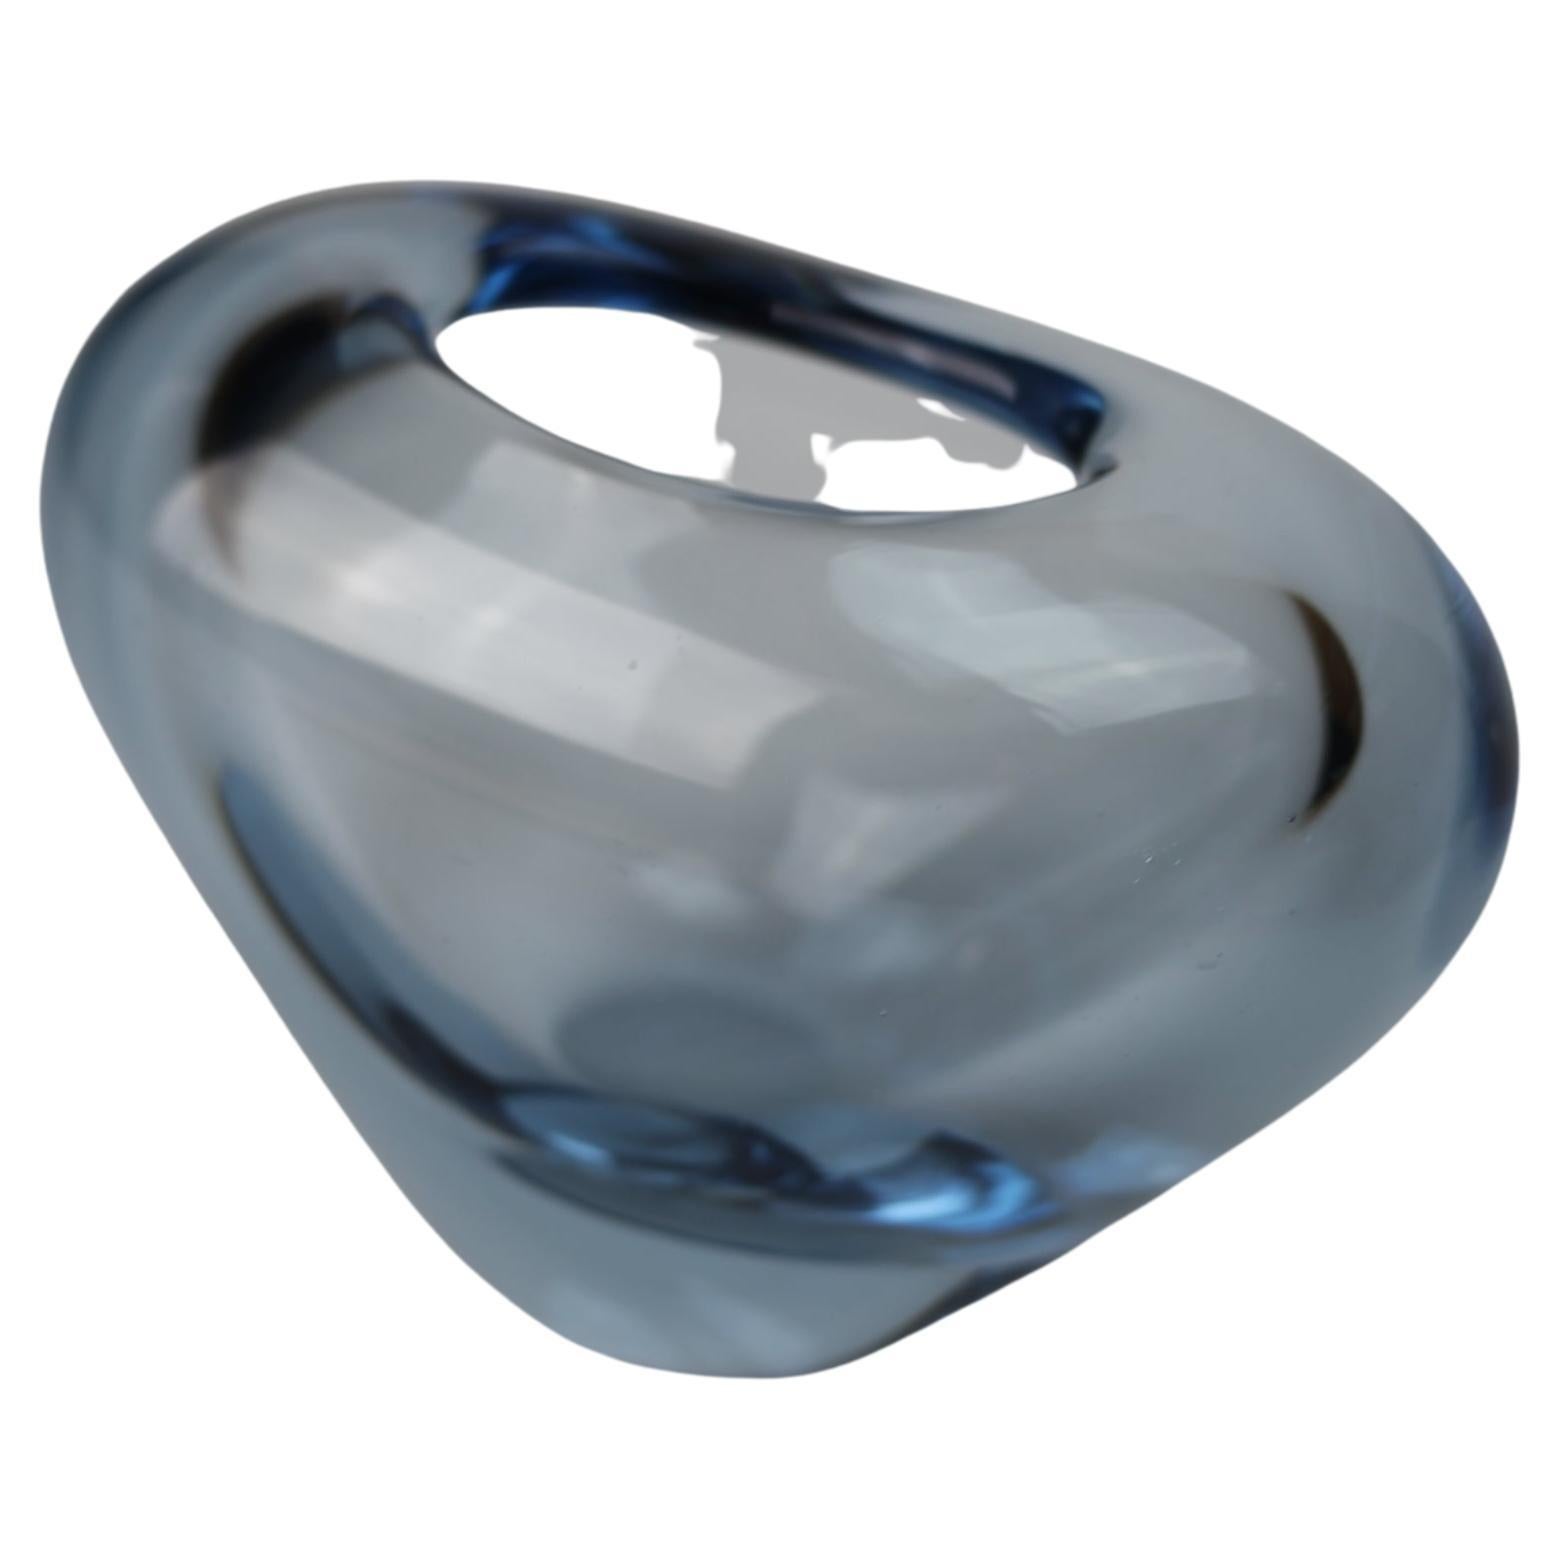 
A stunning Scandinavian aqua blue glass heart shaped 'Minuet' vase. Made by Holmegaard of Denmark and designed by Per Lütken

This unique handmade art piece is the perfect gift for a loved one and fits into every home making it a classic.